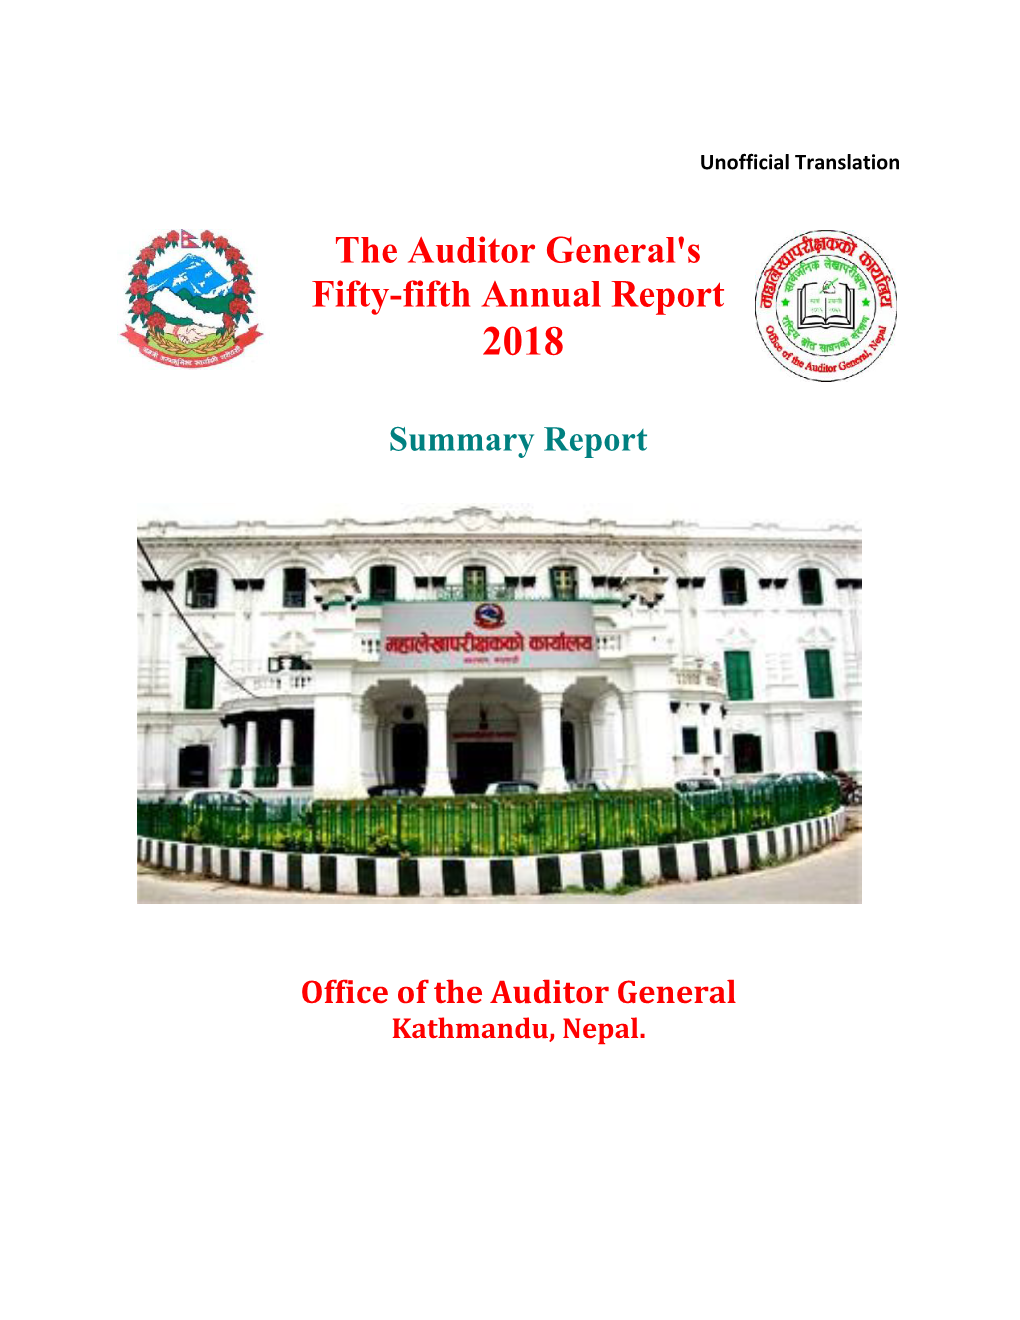 The Auditor General's Fifty-Fifth Annual Report 2018